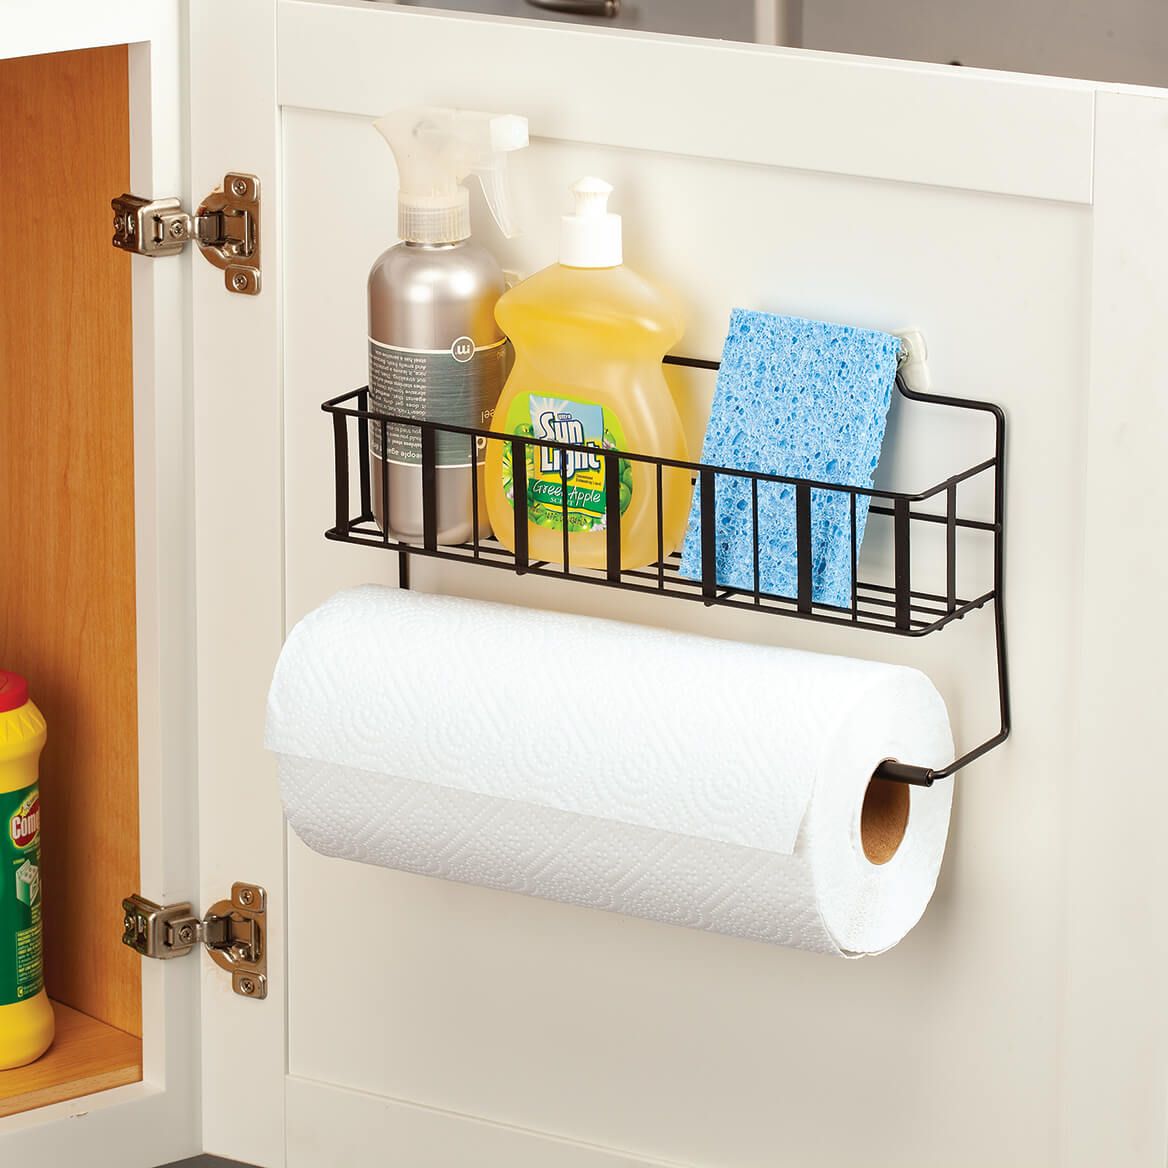 Paper Towel Holder with Shelf by Home Marketplace + '-' + 372352